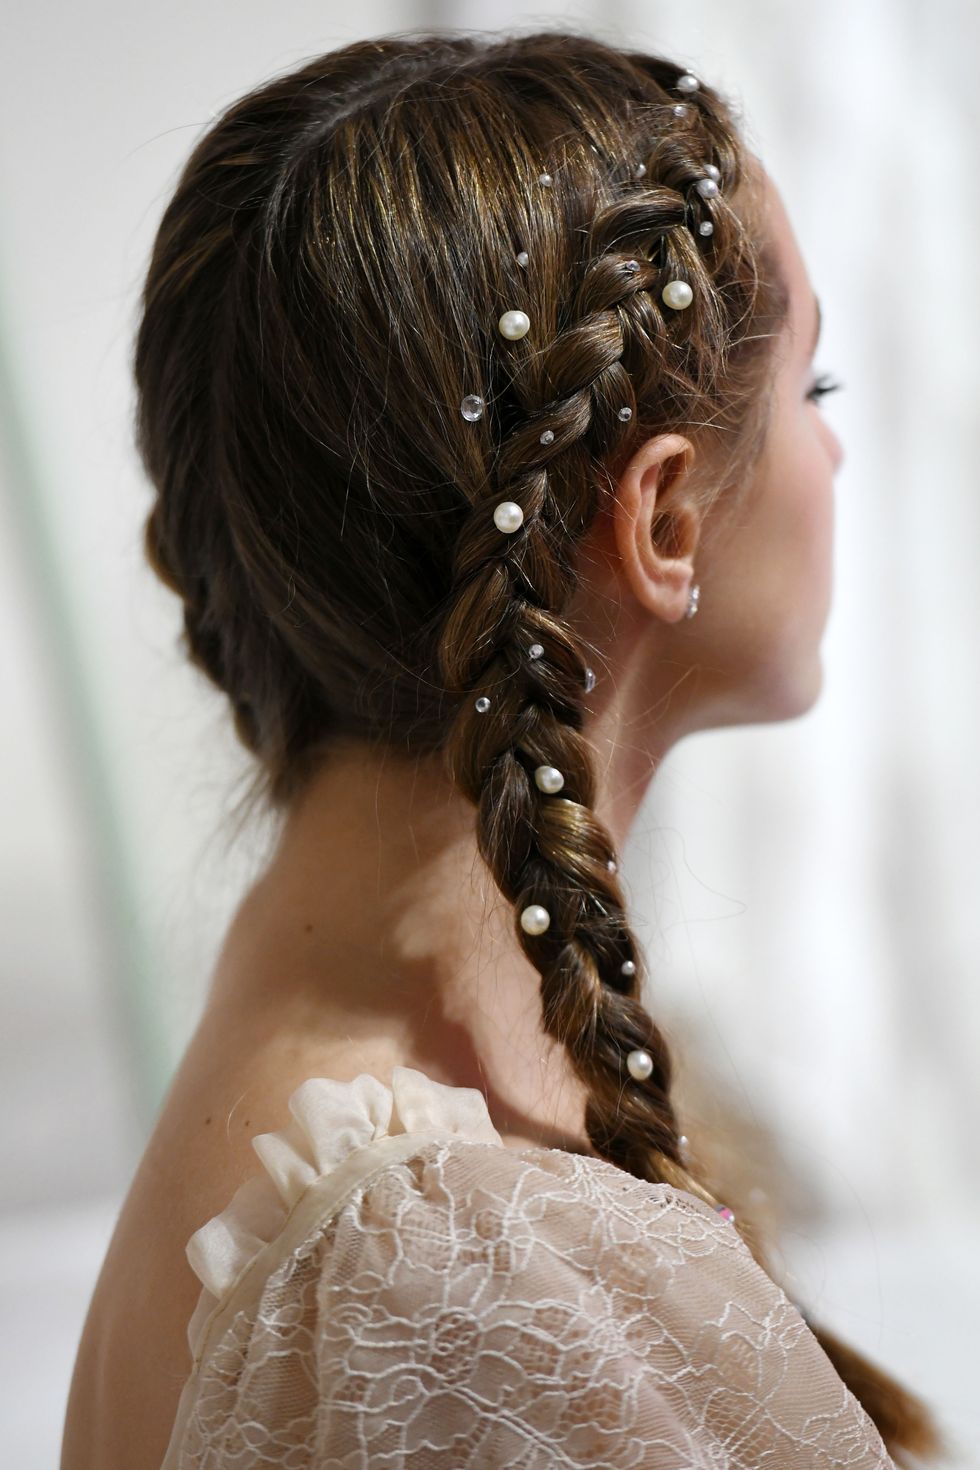 beauty trends 2020 - hairstyles combined with pearl accessories